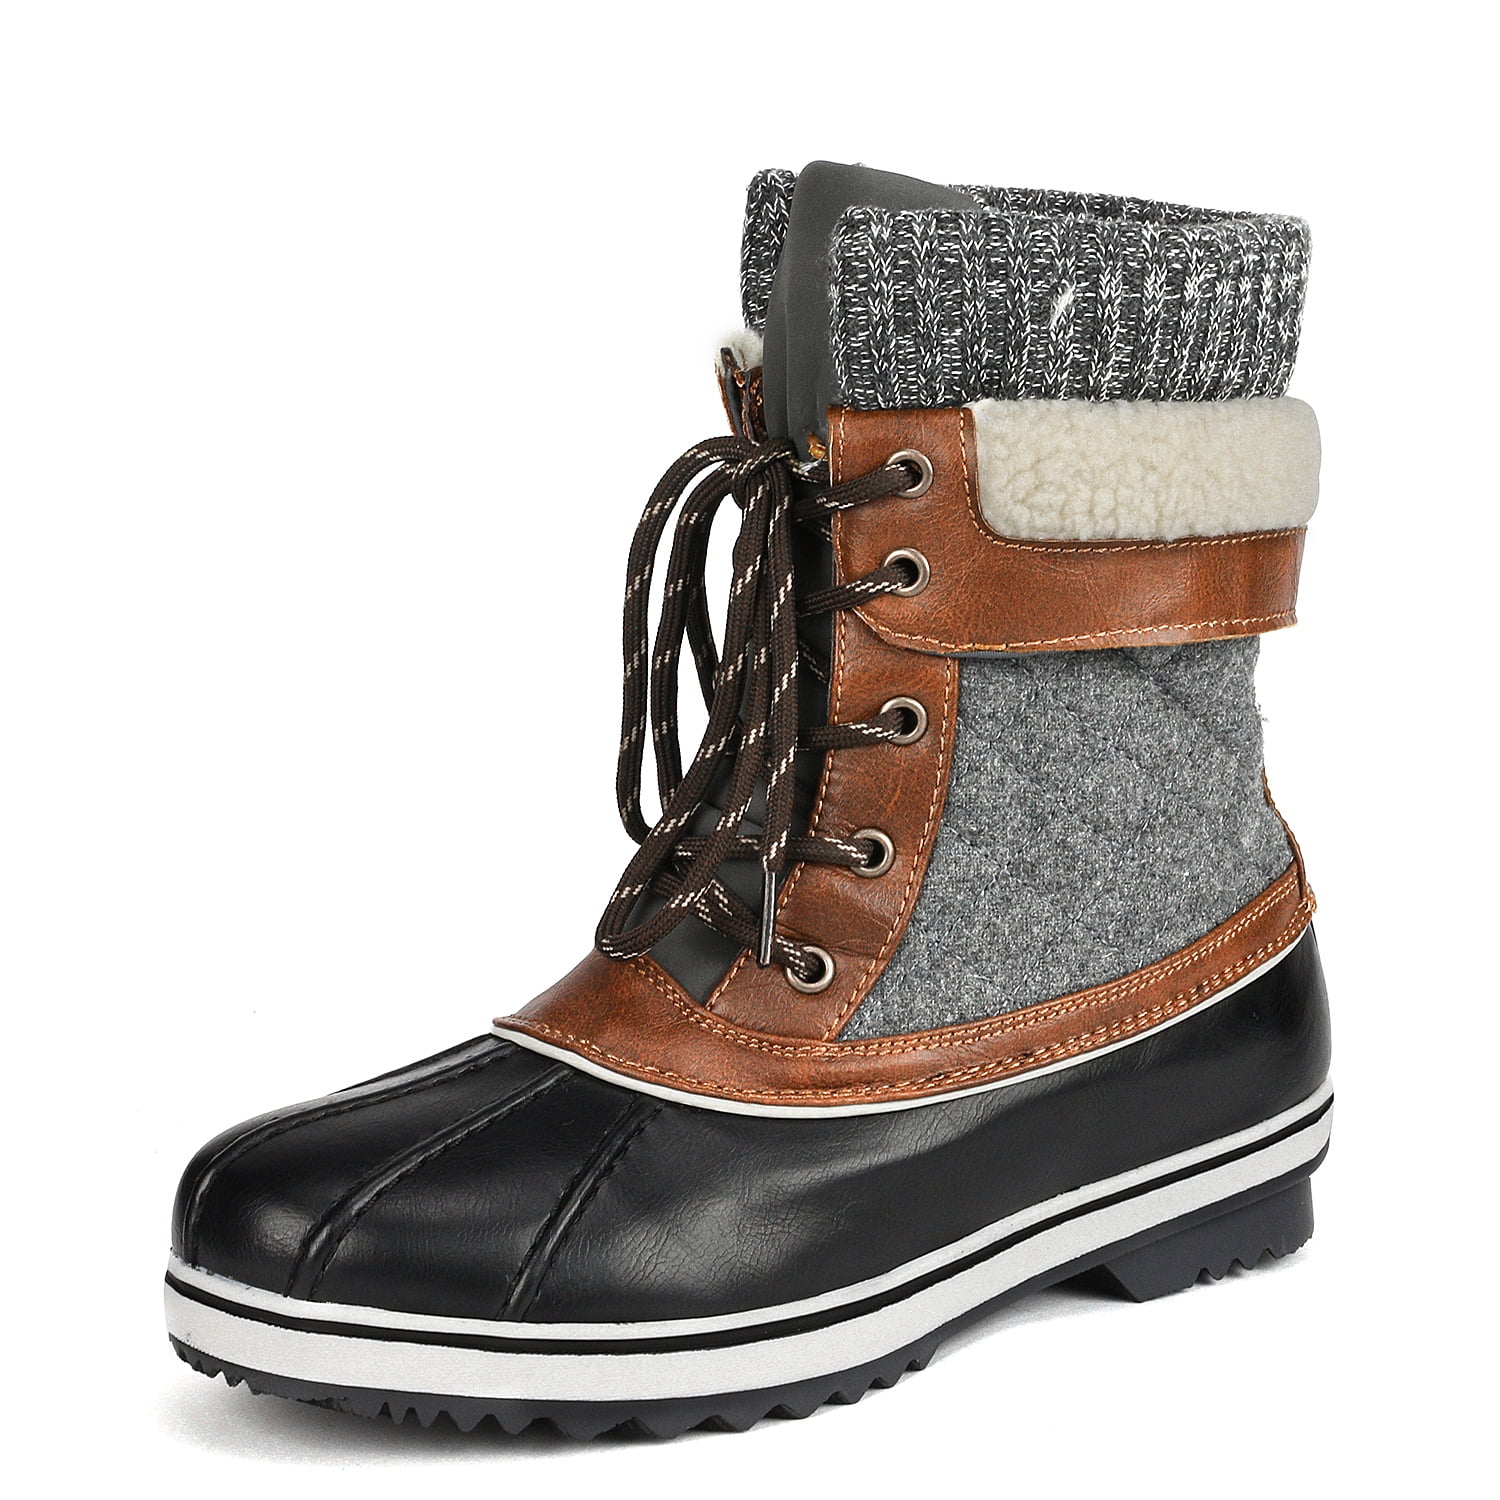 DREAM PAIRS Womens Mid Calf Winter Snow Boots